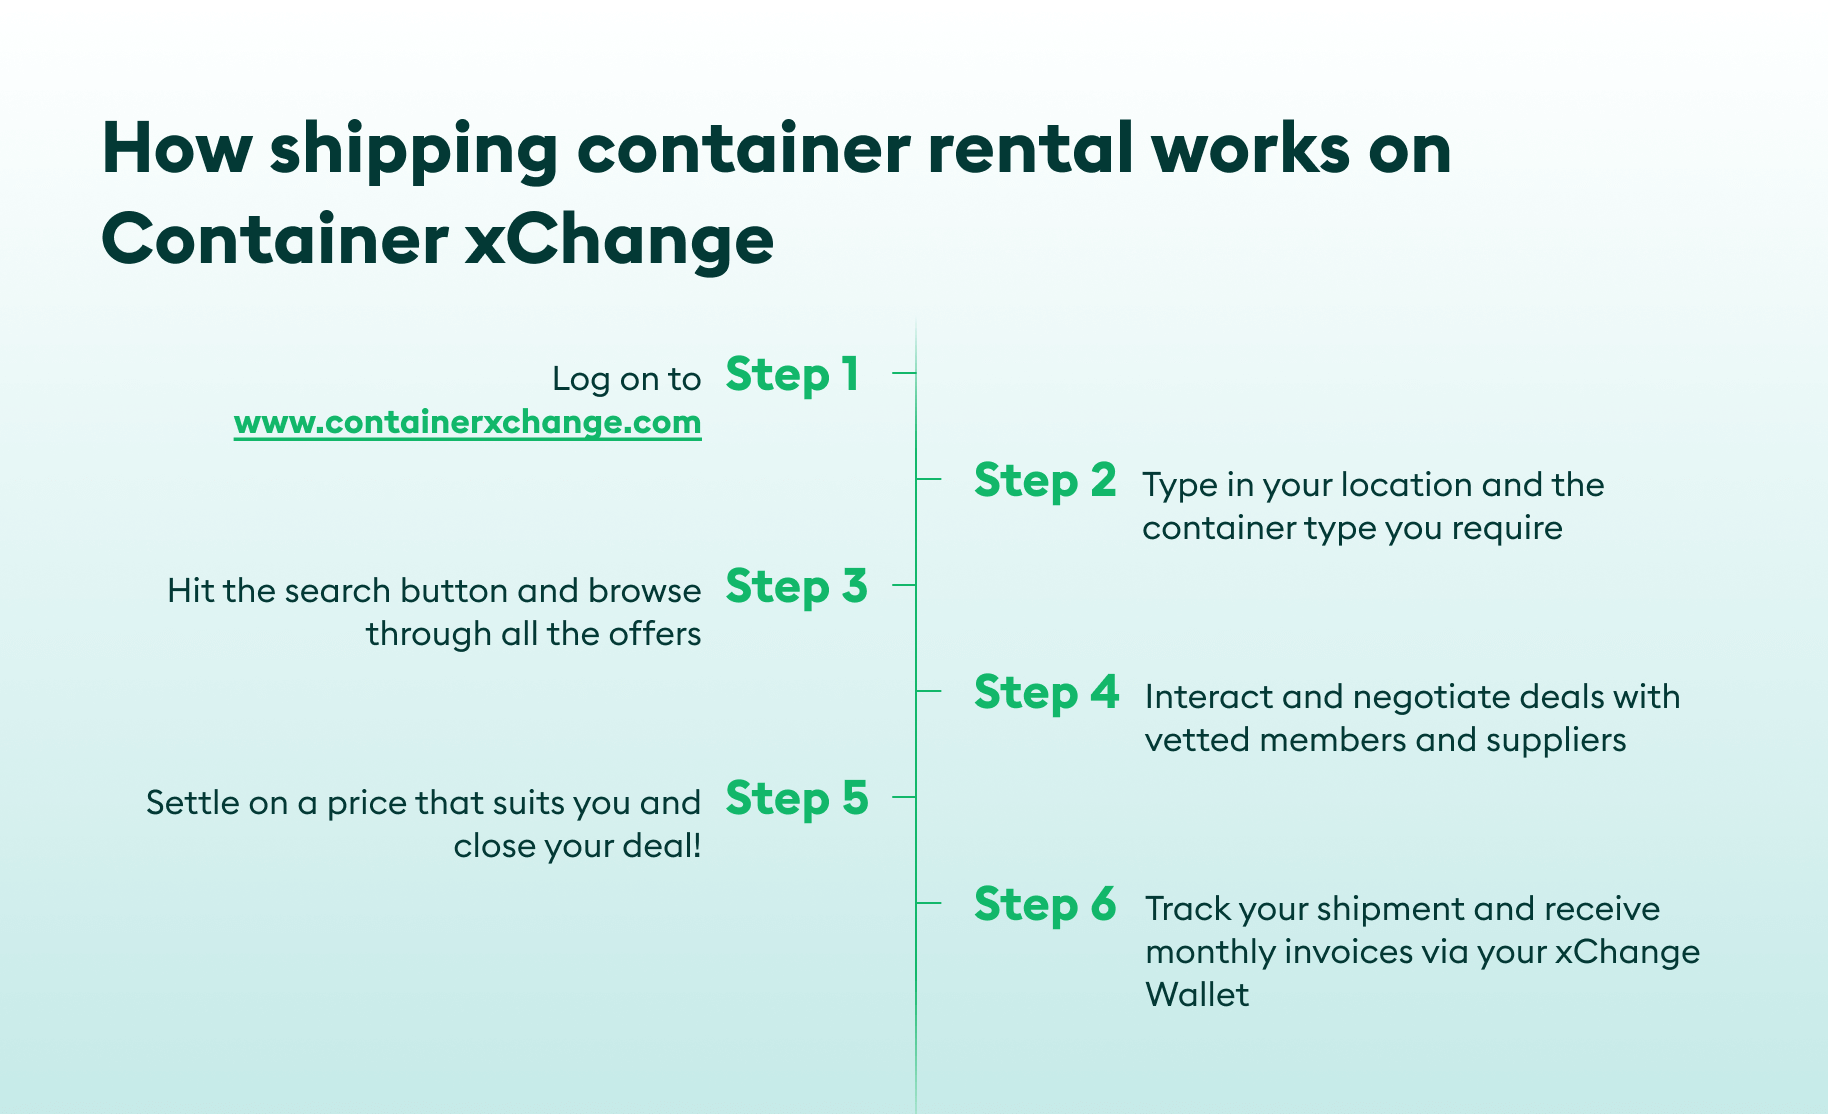 shipping container rental steps on xchange